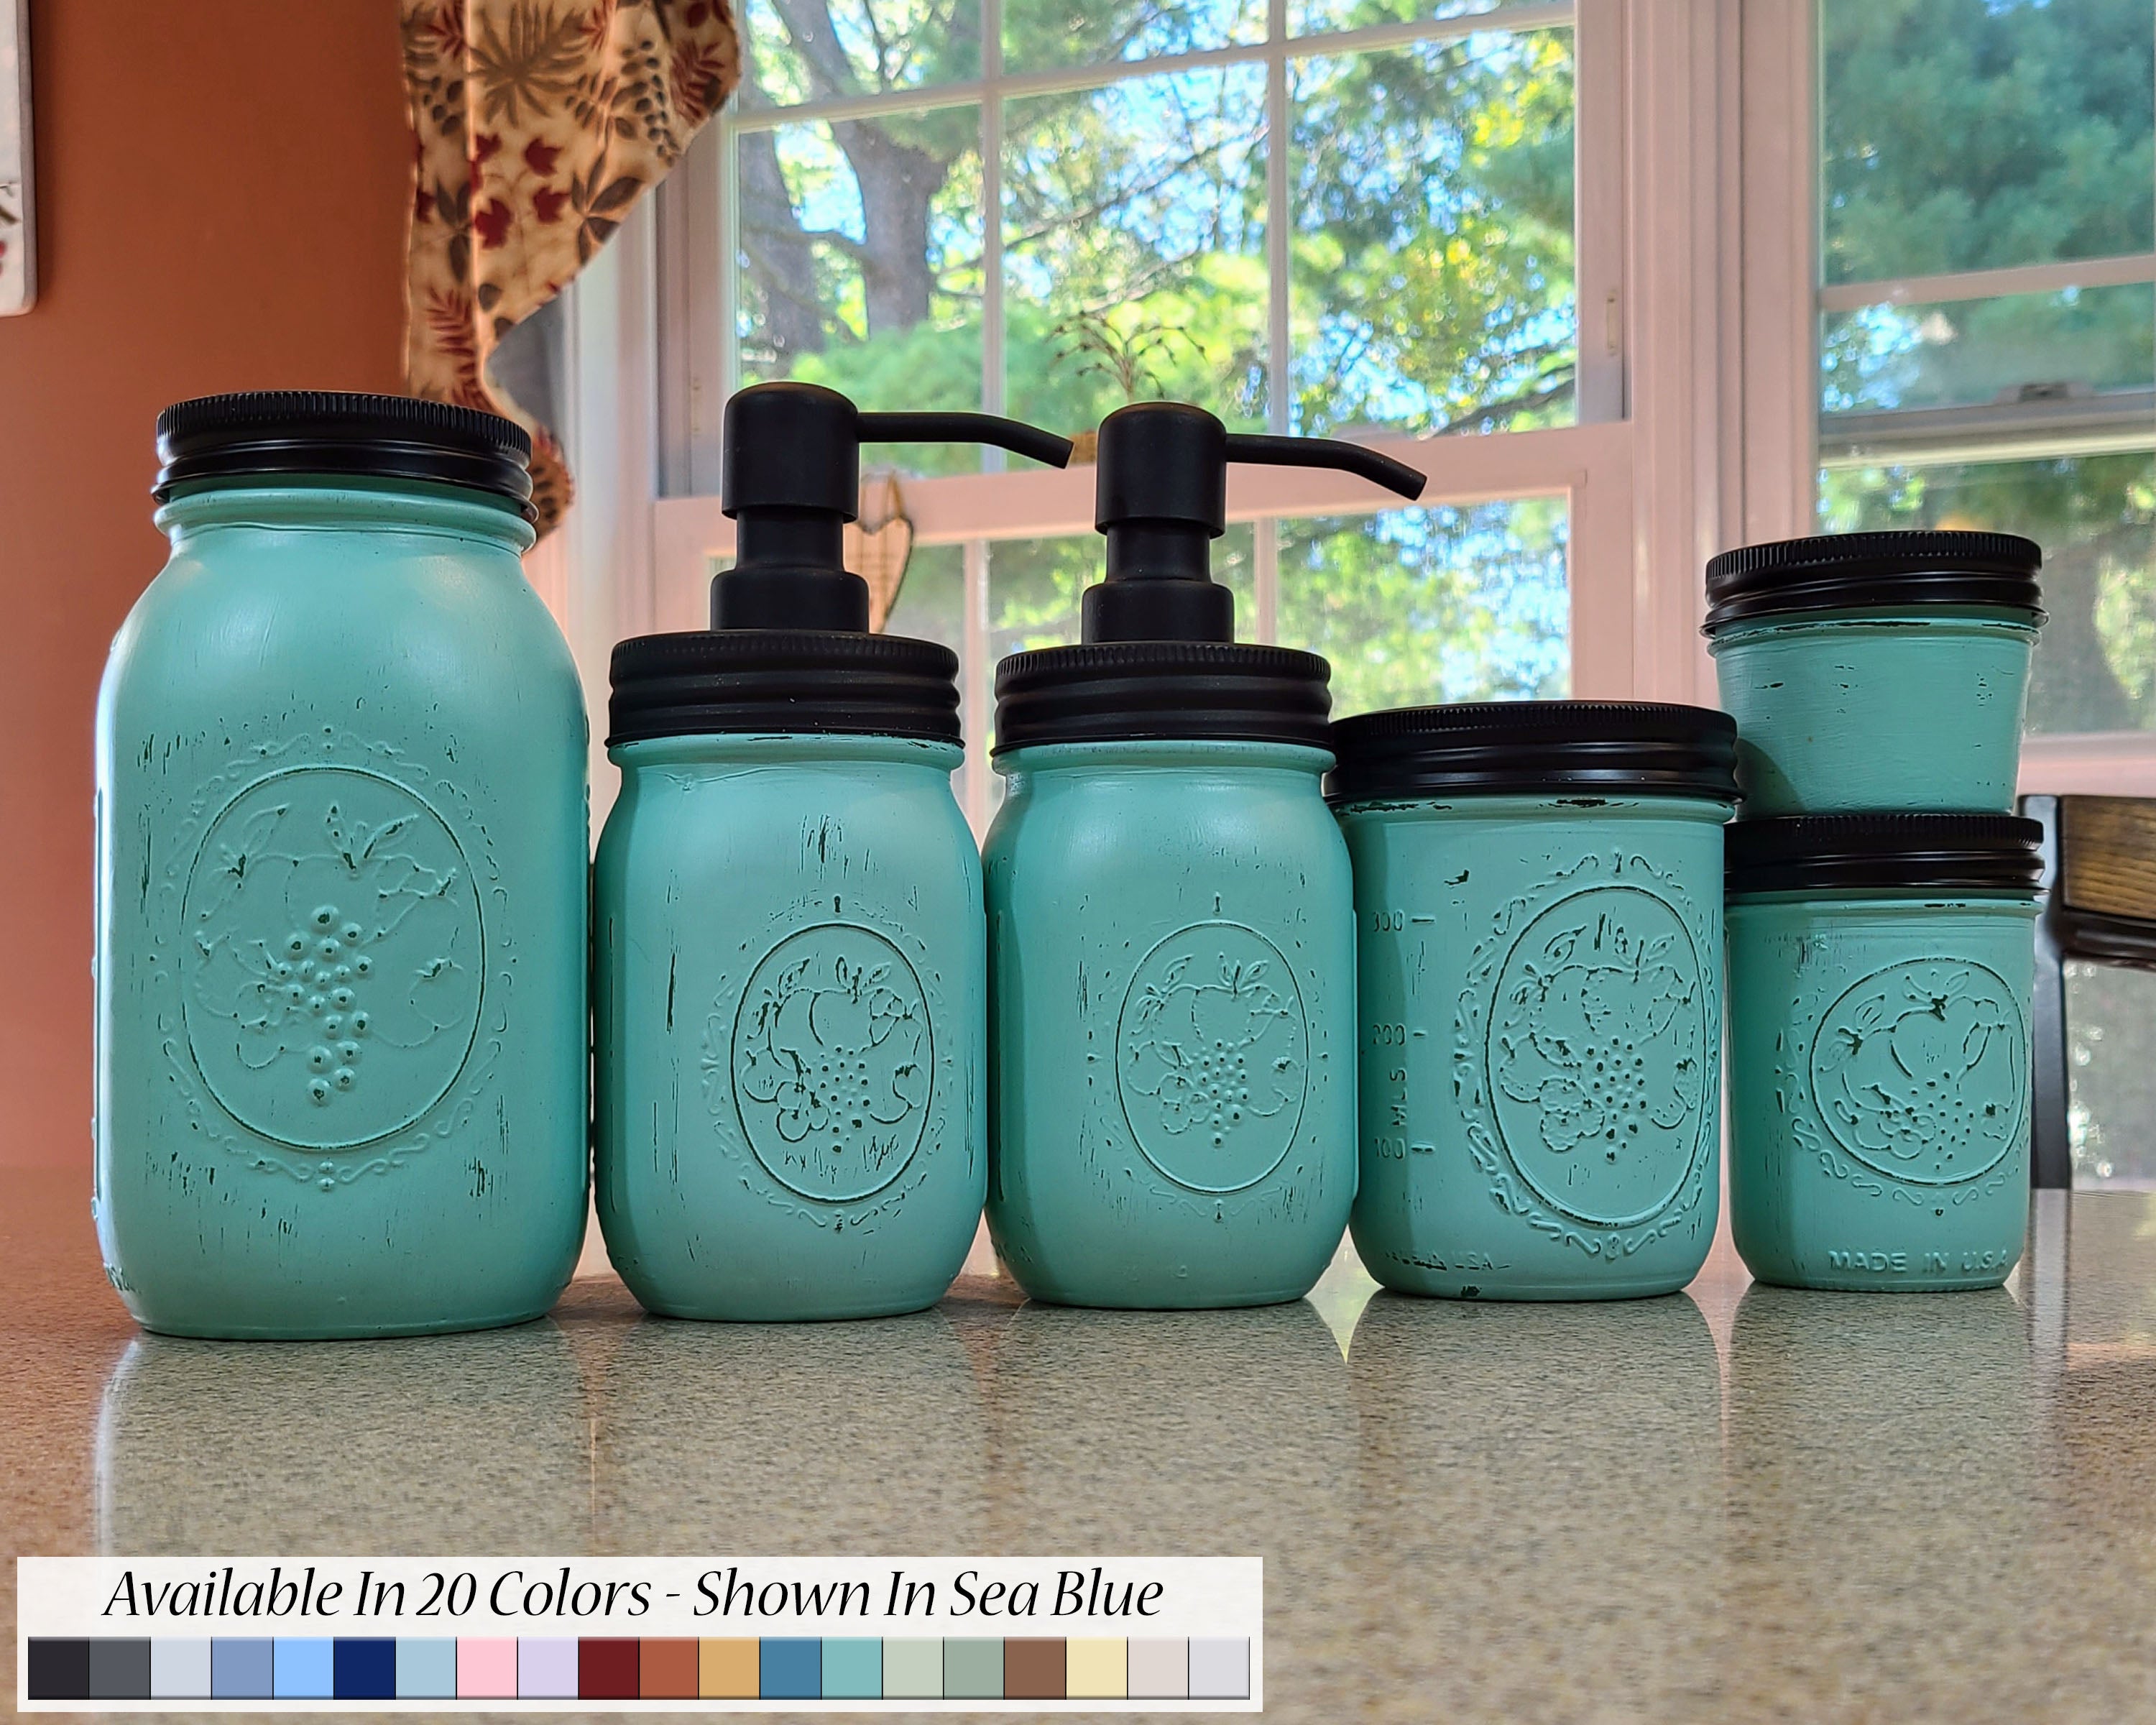 Custom Hand Painted Mason Jar Set with Pump Lids, Shown in Sea Blue with Black Lids